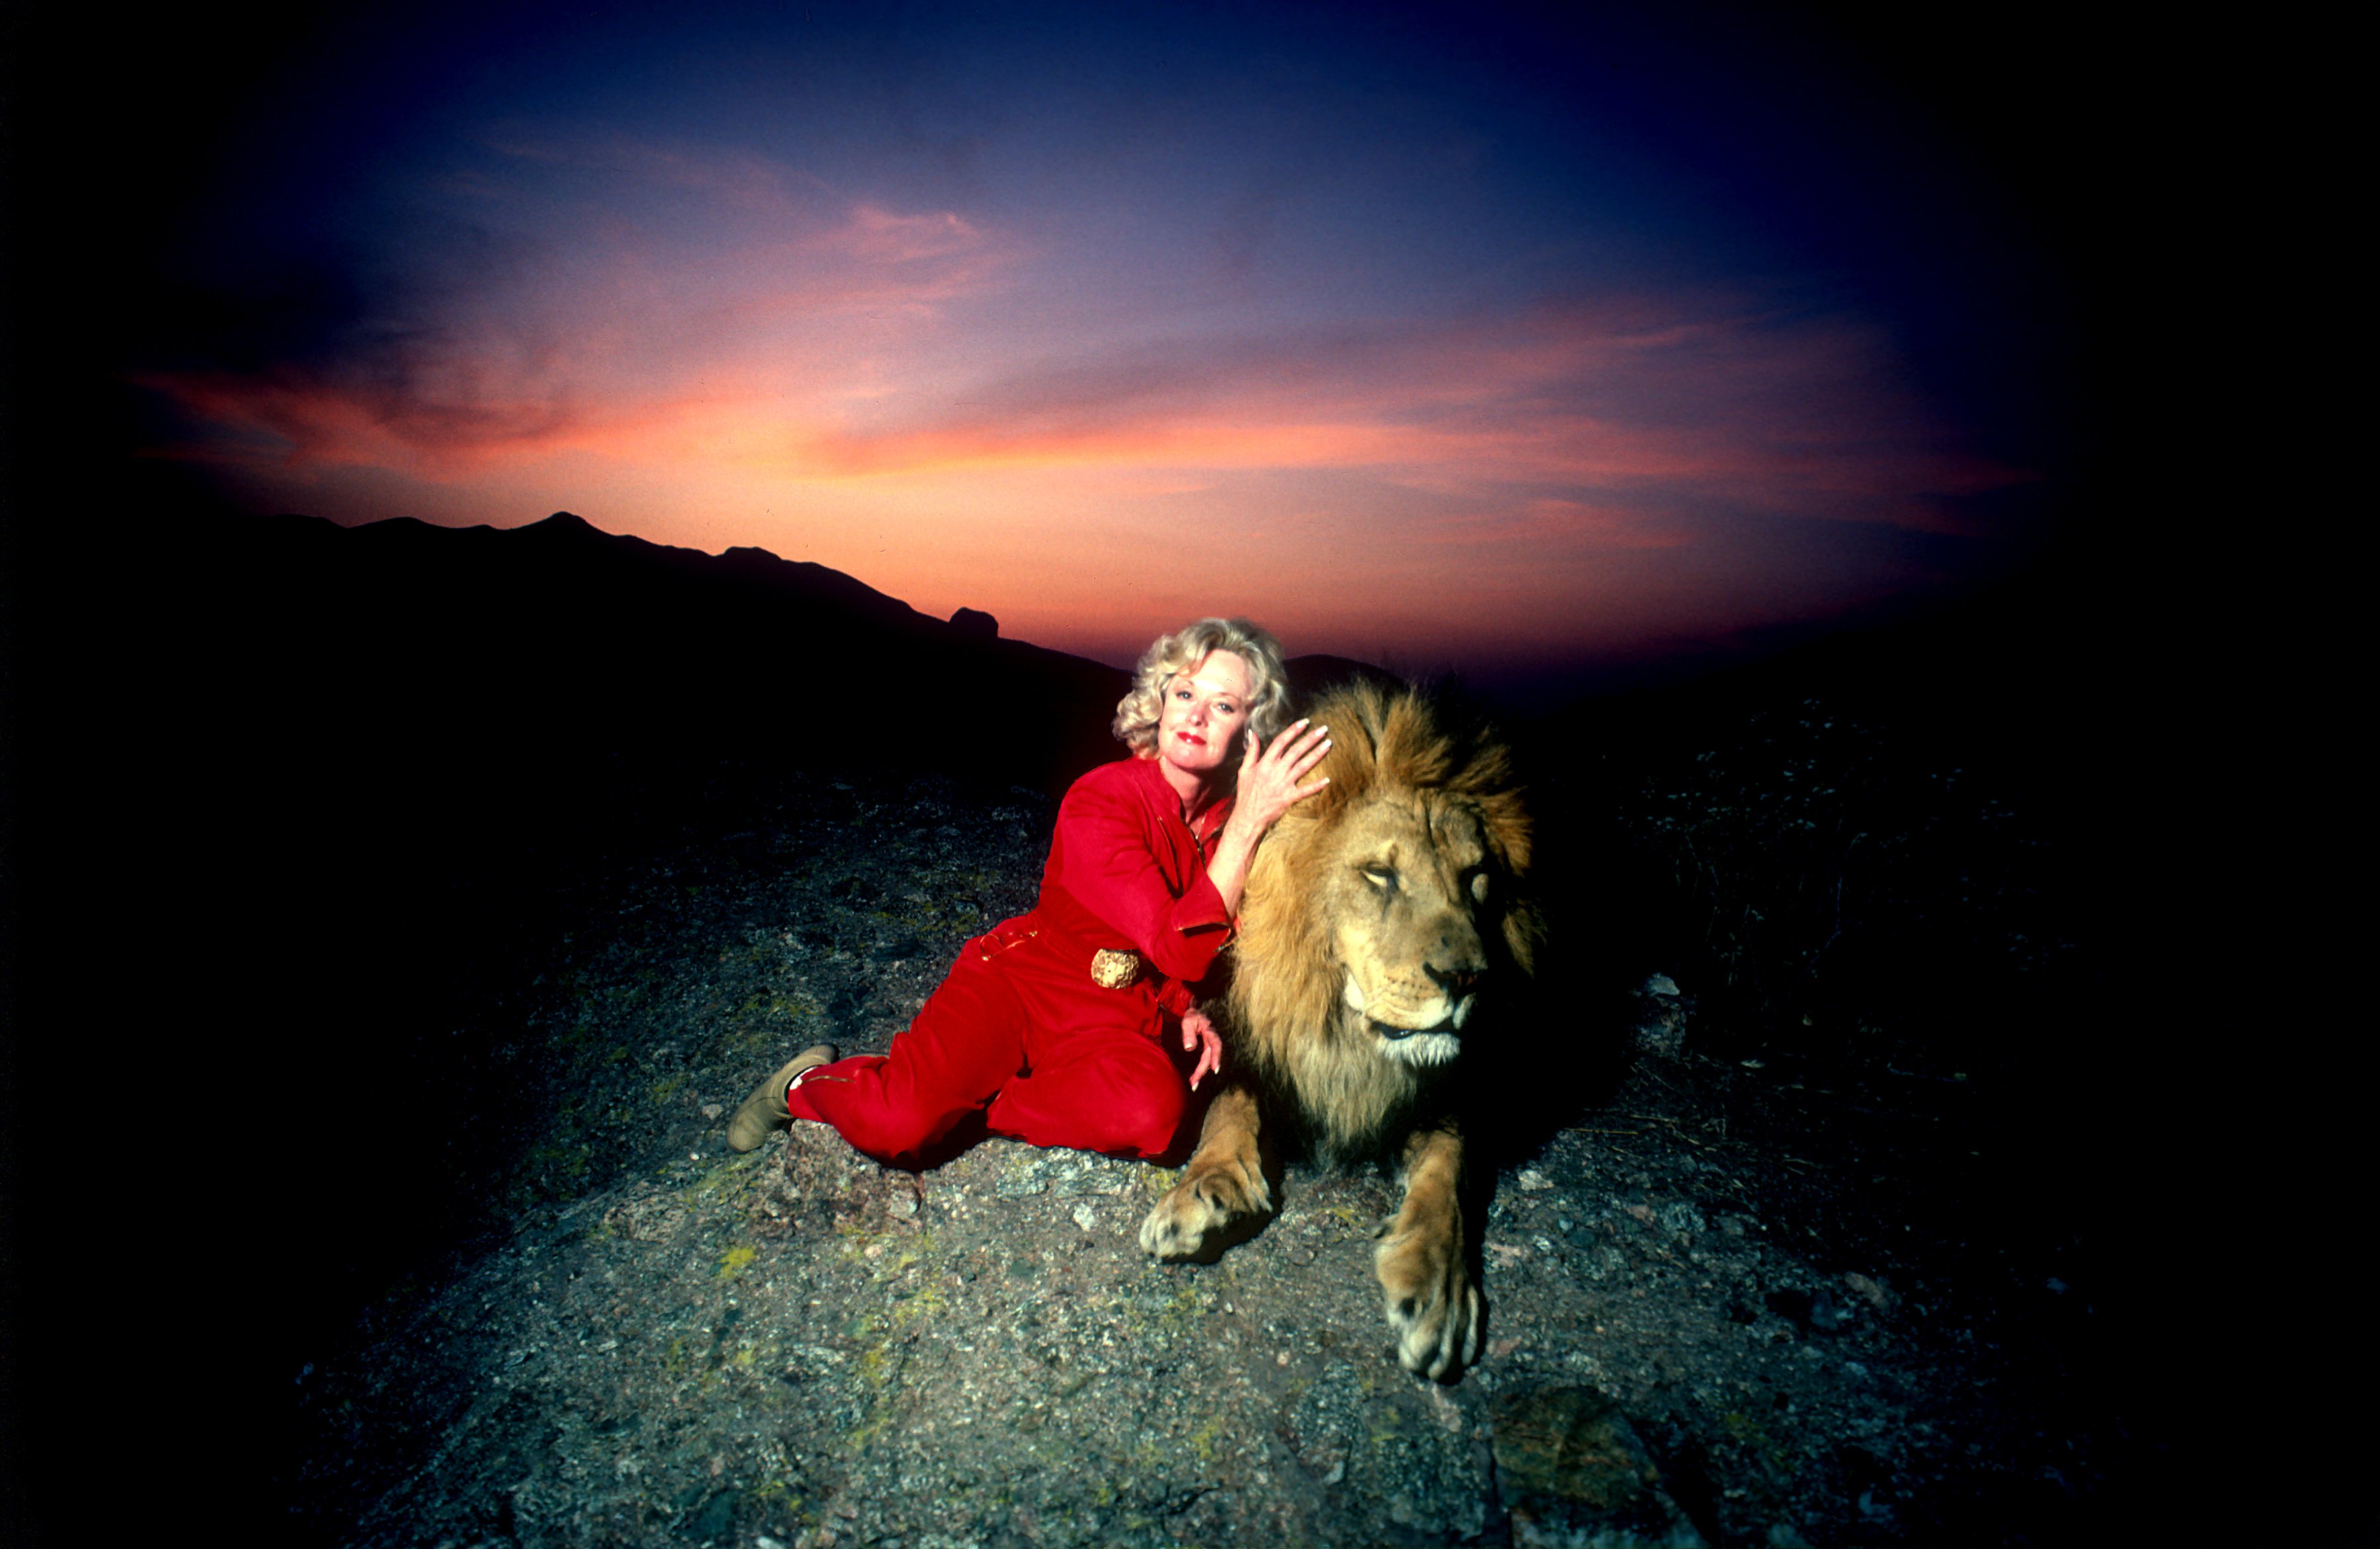 Actress Tipi Hedren, mother of Melanie Griffiths stands on a hill overlooking her Saugus Animal reserve with a full grown male lion. November 16, 1983 on he mountainside in Saugus, California. | Source: Getty Images